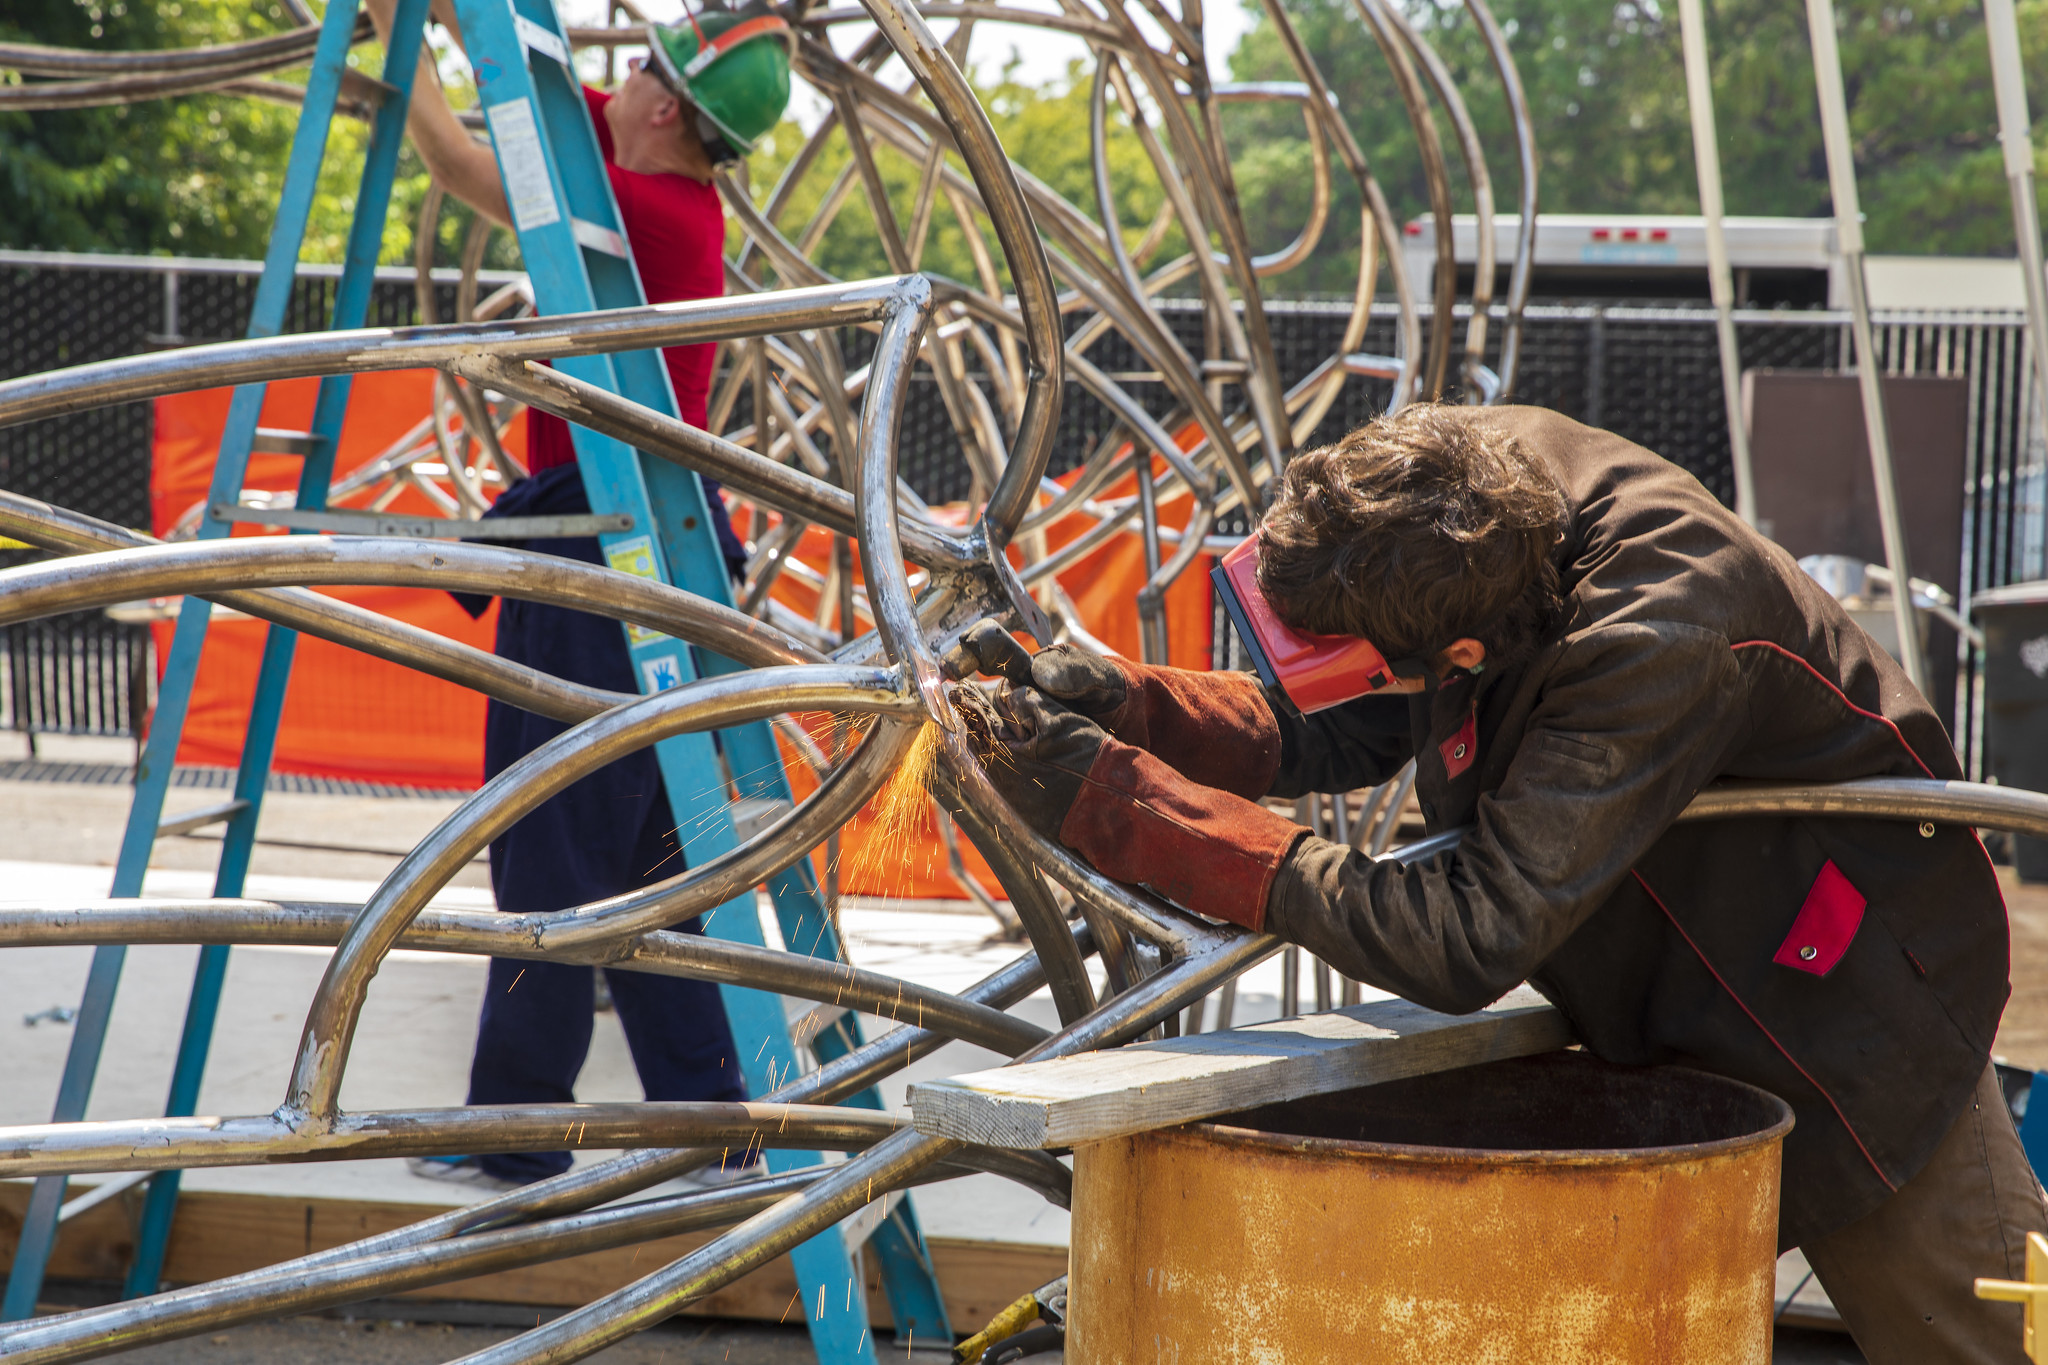 A student wearing safety equipment uses power tools on a metal sculpture